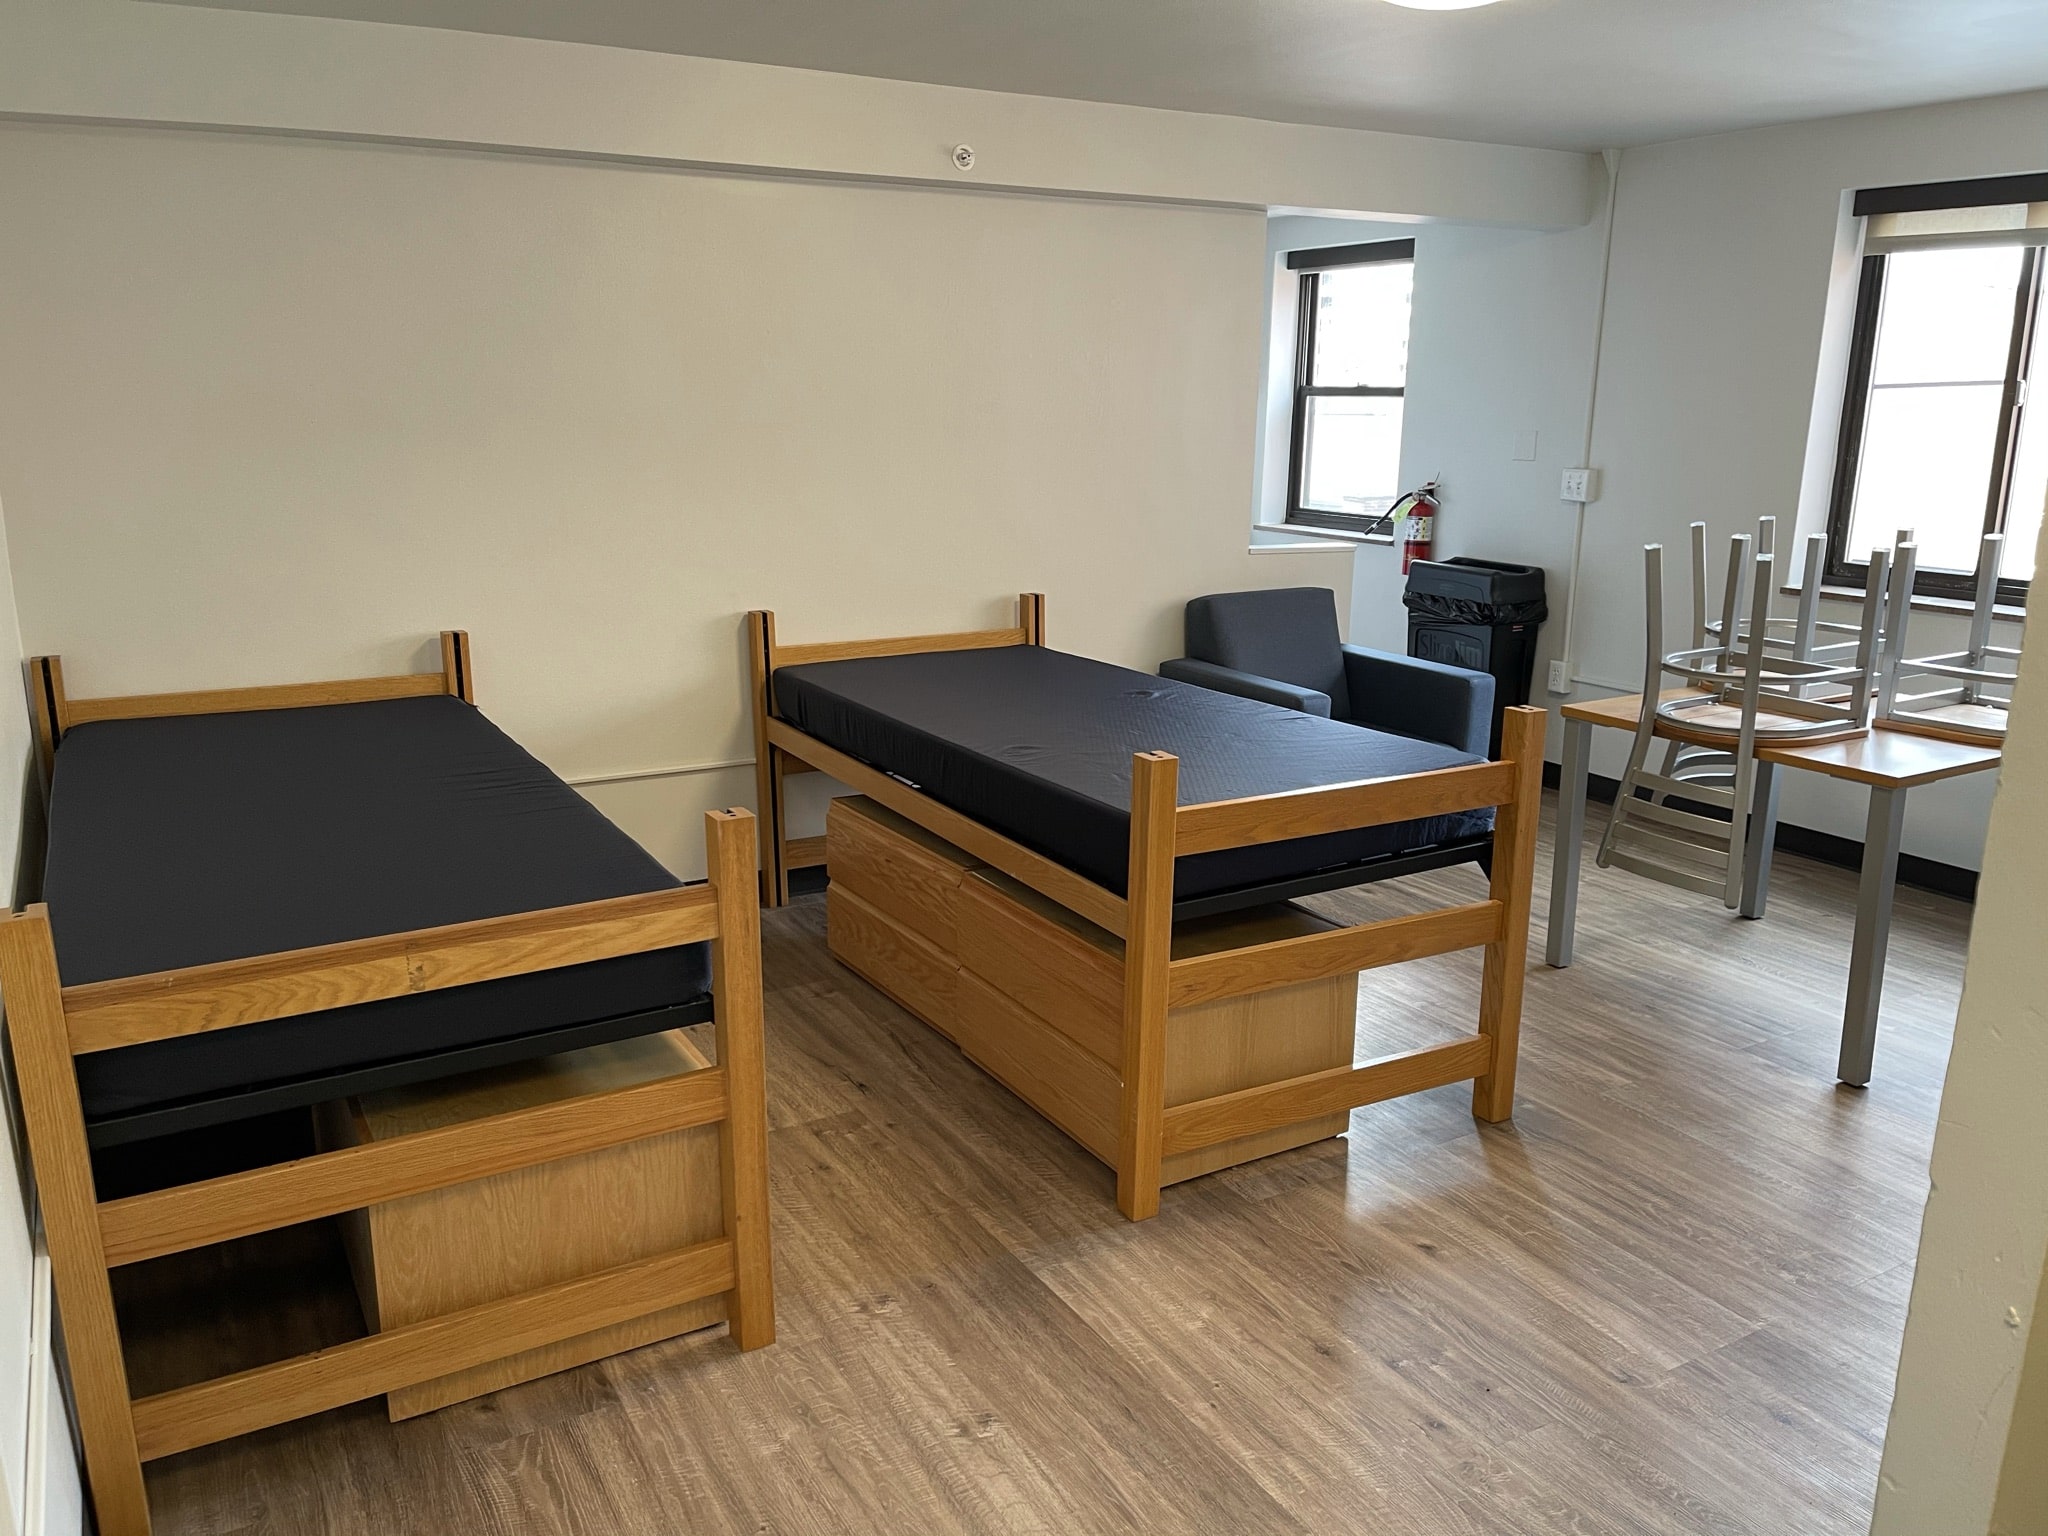 Fifth Neville Studio Apartment Main Room - bed with storage underneath, another bed with storage, table and chairs